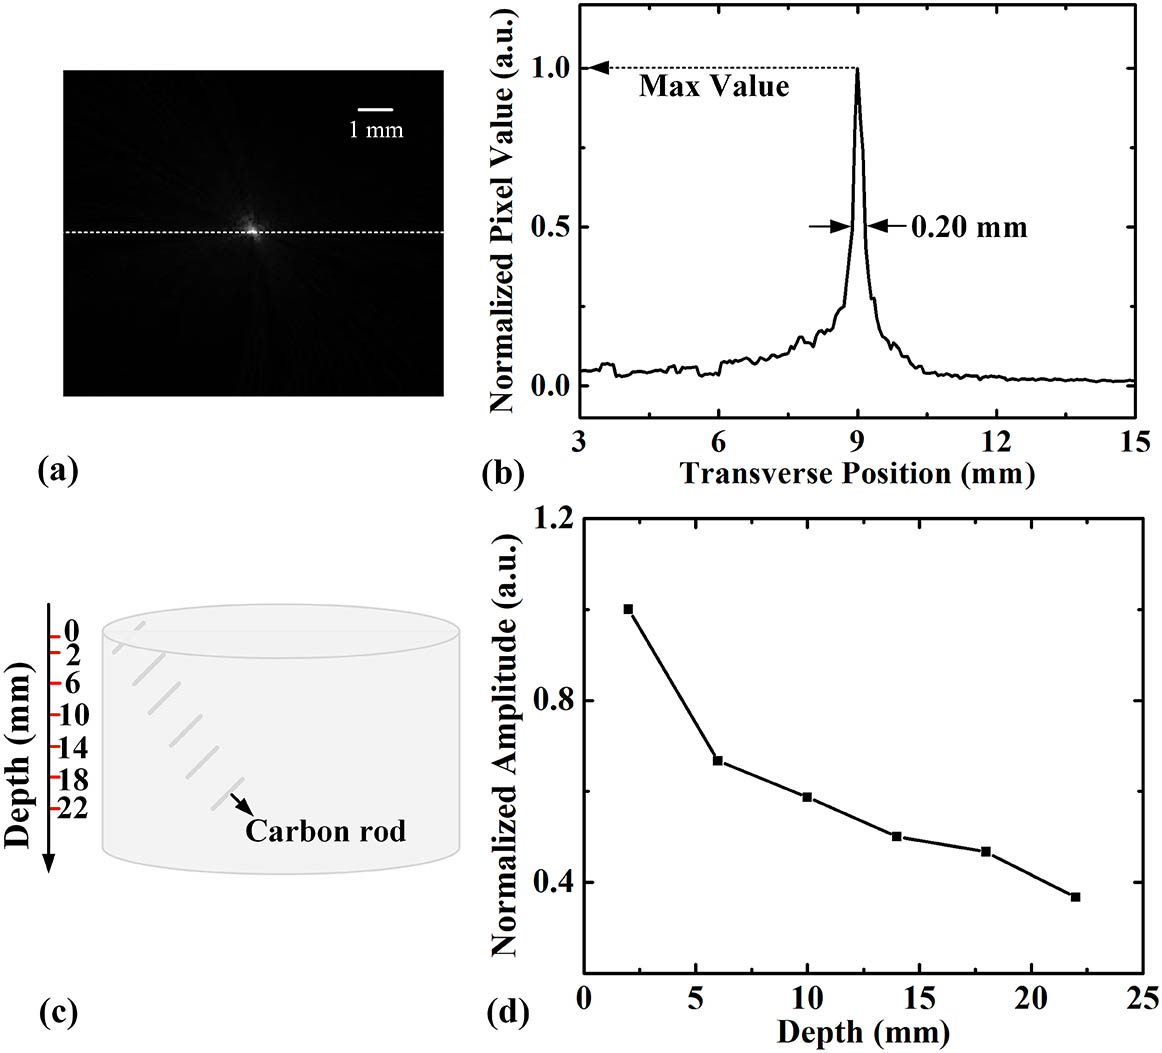 (a) Typical cross-sectional PA image of a black human hair. (b) Quantitative analysis of the imaged size of the human hair. (c) The schematic of the phantom. (d) Normalized amplitude of the PA signal of the absorber at different depths.